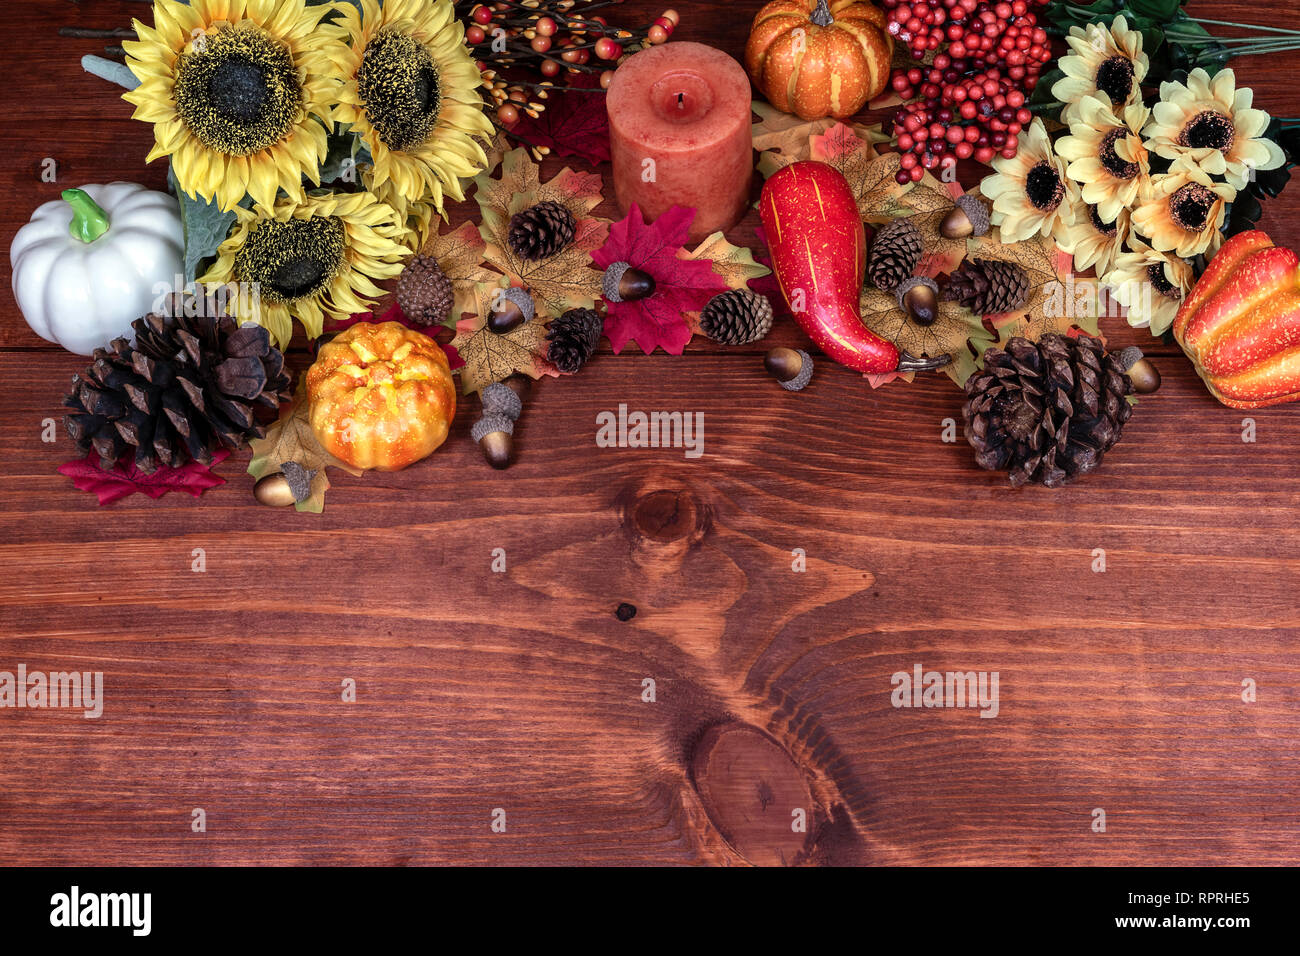 Thanksgiving decor with candle, pine cones, sunflowers, acorns, pumpkins, squash, guard, berries and maple leaves Stock Photo